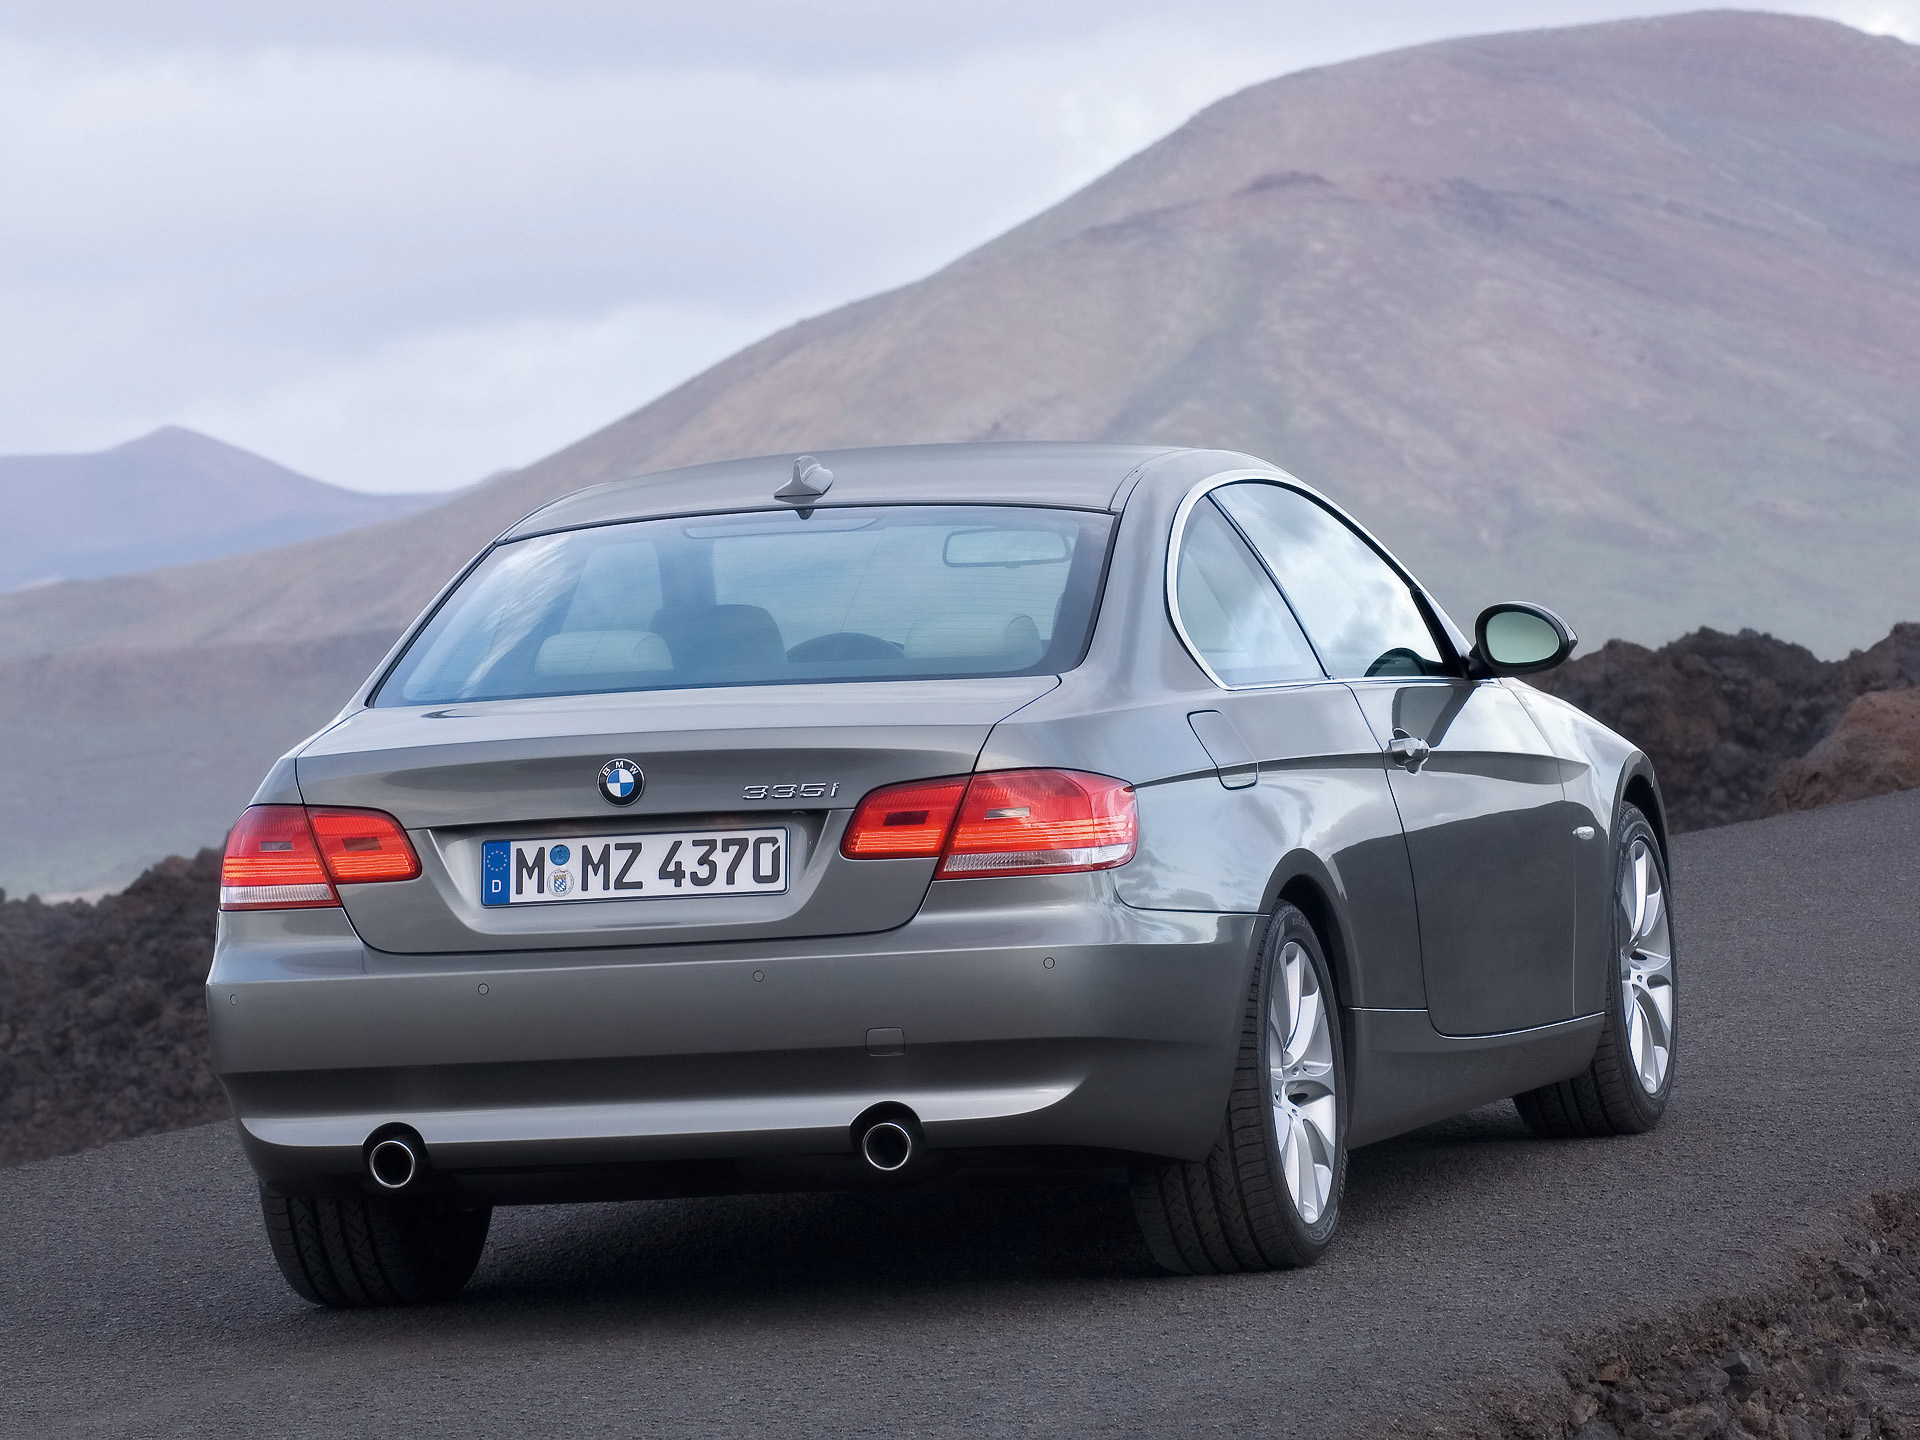 2007 BMW 335i Coupe - Rear Right - 1920x1440 Wallpaper. Image Credits - BMW